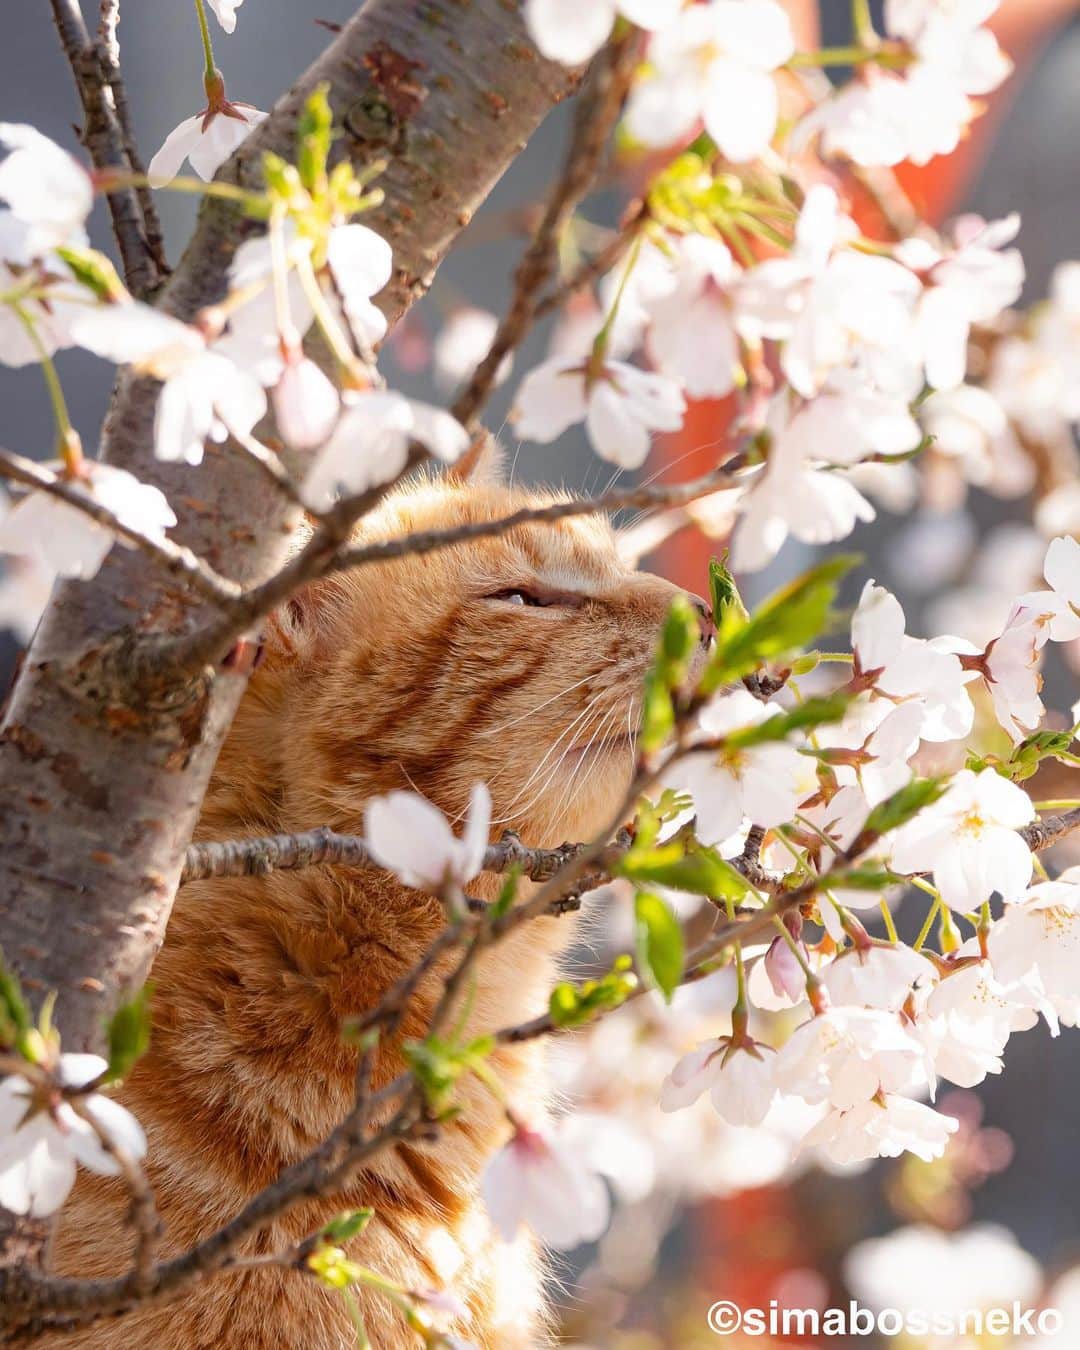 simabossnekoさんのインスタグラム写真 - (simabossnekoInstagram)「・ 素敵な桜でしたにゃ🌸 It was lovely cherry blossoms and cats❣️ Swipeしてね←←🐾  〜お知らせ〜 新作写真集「島にゃんこ」好評発売中❣️ @simabossneko と、ぺにゃんこ( @p_nyanco22 )との初共著🐾  日本の島々で7年間撮り続けてきた、島の猫さん達のとびっきりの表情やしぐさがいっぱい✨ 厳選したベストショットから初公開の作品まで、愛おしくて幸せな瞬間を集めました。  ★Amazonほかオンライン書店、本屋さんにて！ ★メルカリShopsとminne simabossneko's shopでは、サイン本を販売中🐾  お気に入りの一冊になれば嬉しく思います☺️  📘A5変形サイズ／88ページ 1,210円(税込) ワニブックス刊  販売各ショップへは @simabossneko もしくは @p_nyanco22 のプロフィールURLよりご覧いただけます。  もしくはminne、メルカリShops内にて "simabossneko's shop"と検索ください🔎 ・ ・ 【Notice】 NEW 3rd Photobook "Shima Nyanko (Island Cats)"  The book is co-authored by @simabossneko and @p_nyanco22  There are lots of wonderful photos of island cats✨  ◆The autographed books are available now at “minne simabossneko's shop“.   〜Description of the work〜 The cute cats that we have been shooting for 7 years in the islands of Japan.  From the carefully selected best shots to the first public photo, we have collected lovely and happy gestures. Kissing, cuddling, rubbing, synchronizing, playing, licking... The cats will heal you!  Please make a purchasing for this opportunity 😸🐾 The product page can be seen from the URL in the profile of @simabossneko or @p_nyanco22   ★Amazon Japan https://www.amazon.co.jp/dp/4847072863  ★simabossneko's shop URL https://minne.com/＠simabossneko  It is possible to purchase and ship from Taiwan, Hong Kong, the USA, Korea, etc. ※ Shipping fee will be charged separately.  📘A5 variant size / 88 pages 1,210 JPY Published by Wanibooks ・ ・ #しまねこ #島猫 #ねこ #にゃんすたぐらむ #猫写真 #cats_of_world #catloversclub #pleasantcats #catstagram #meowed #ig_japan #lumixg9」4月21日 7時50分 - simabossneko